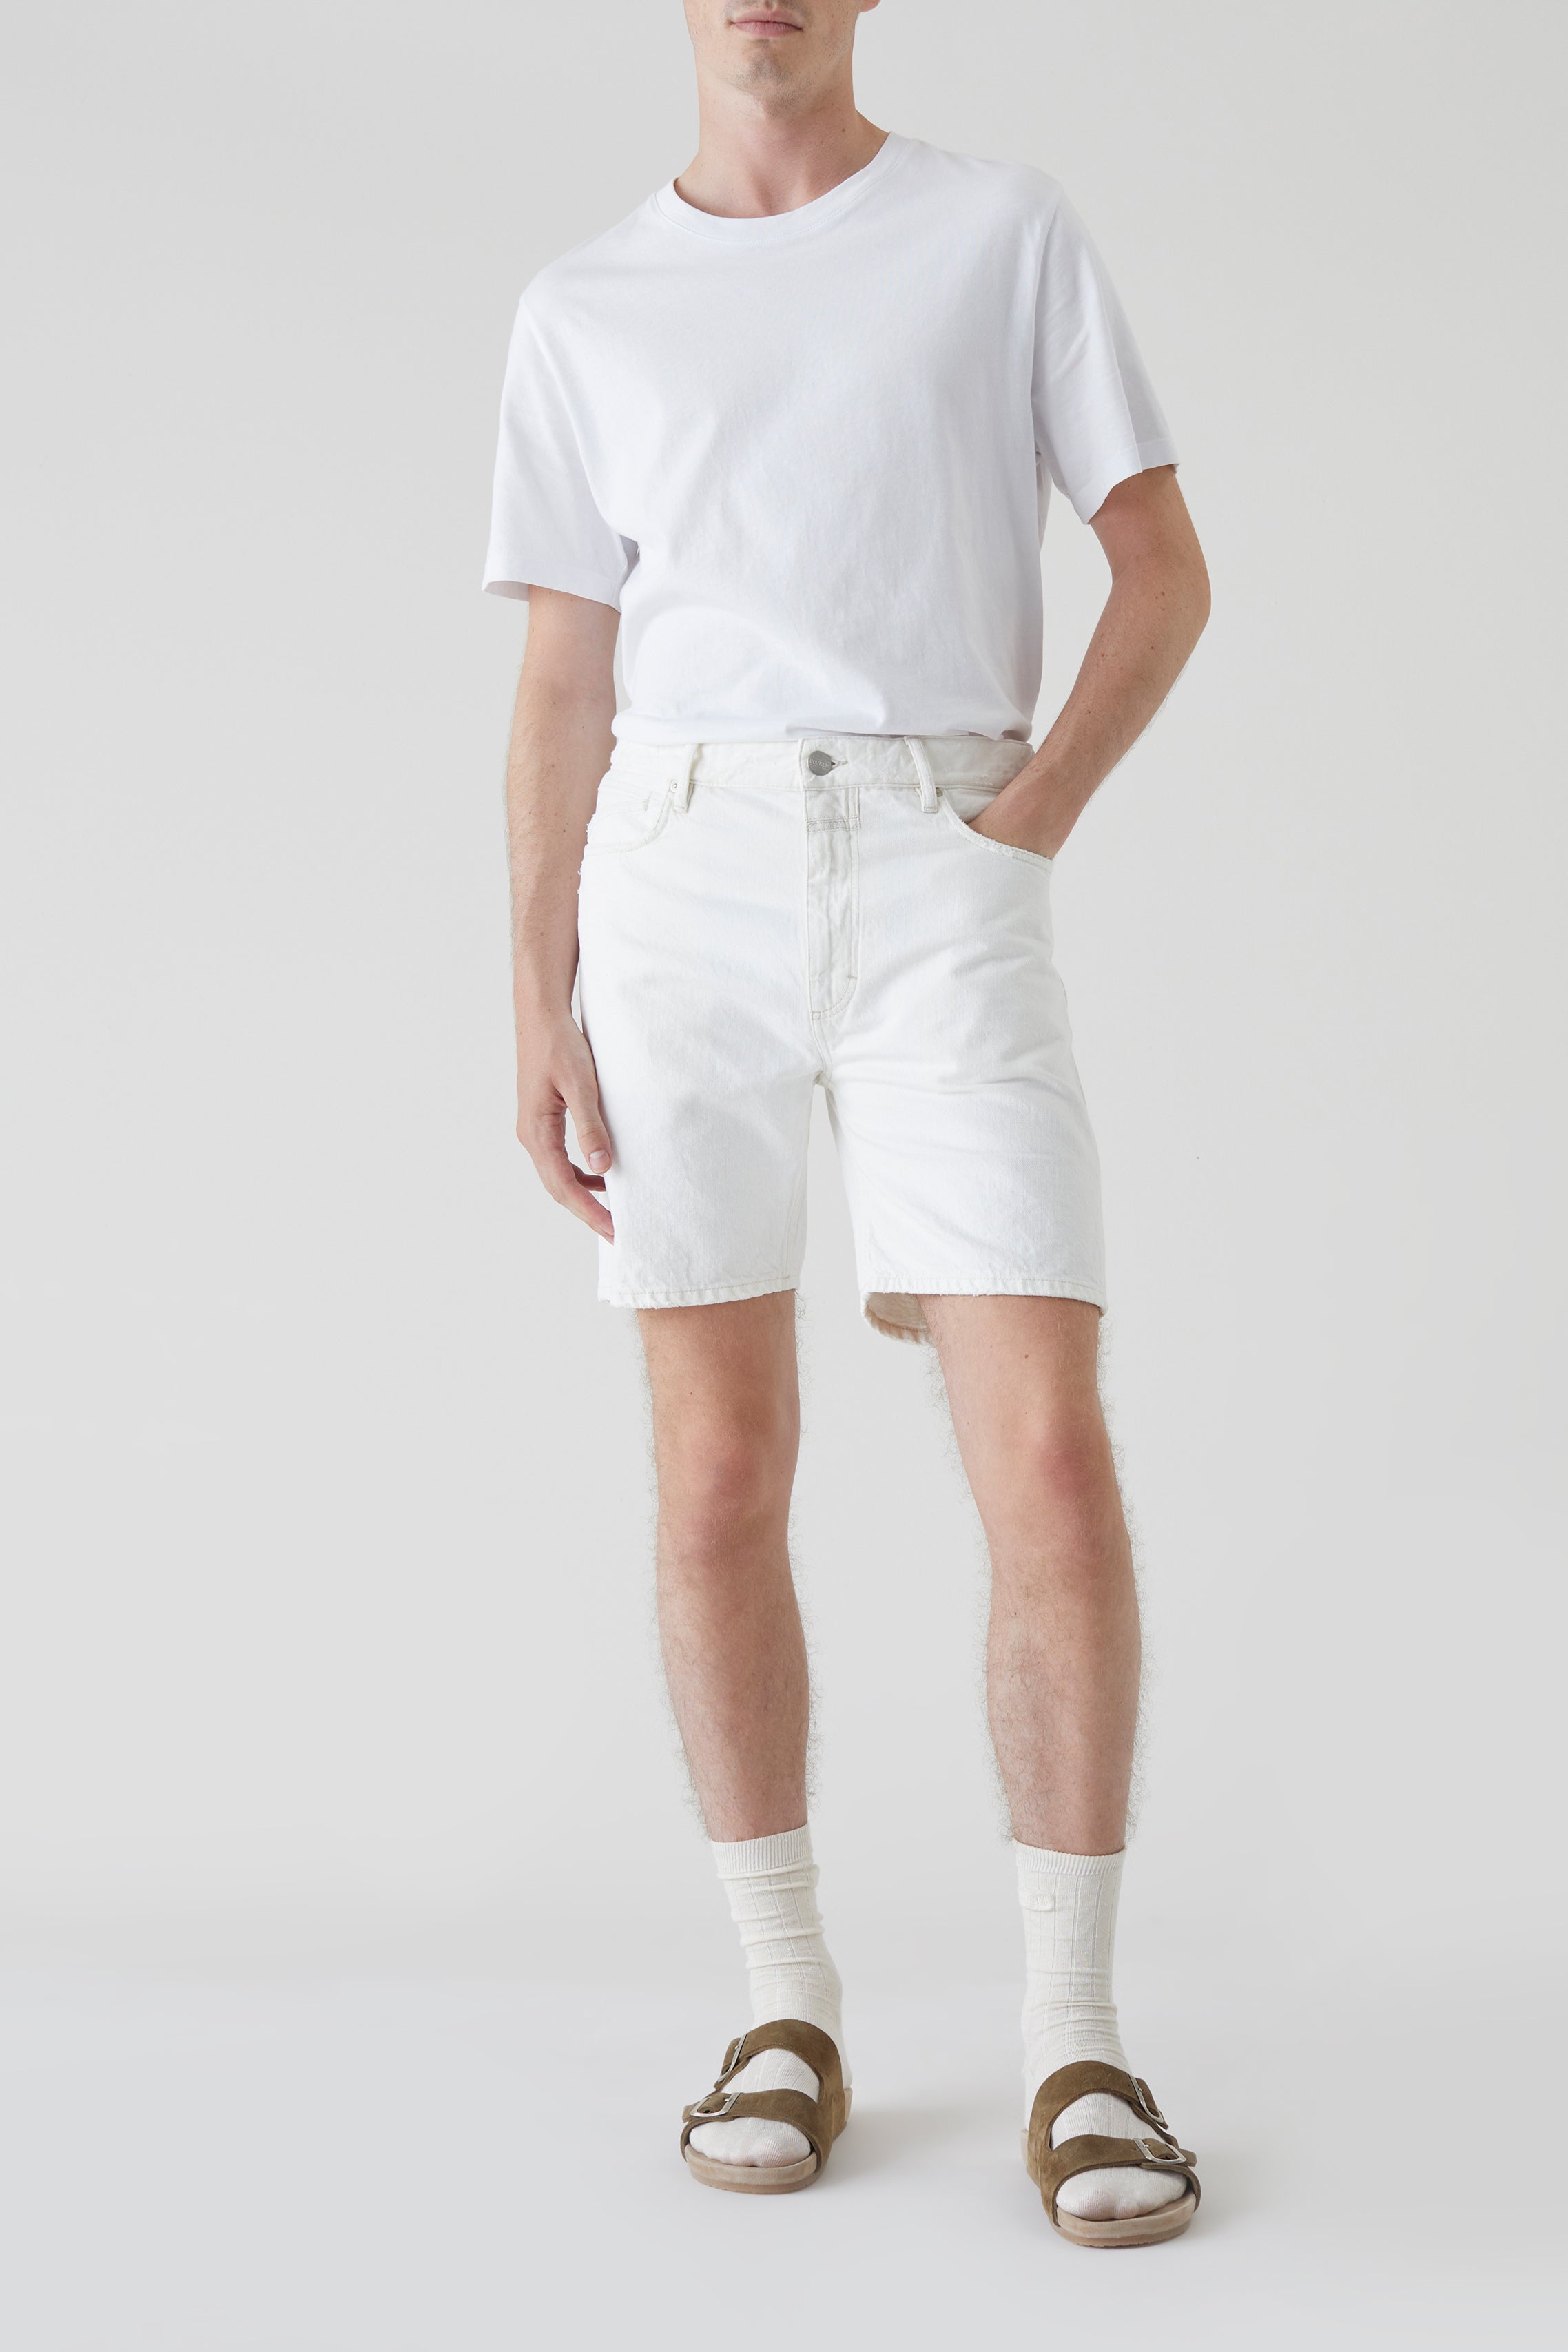 CLOSED-OUTLET-SALE-STYLE-NAME-BOGUS-SHORTS-Hosen-ARCHIVE-COLLECTION.jpg